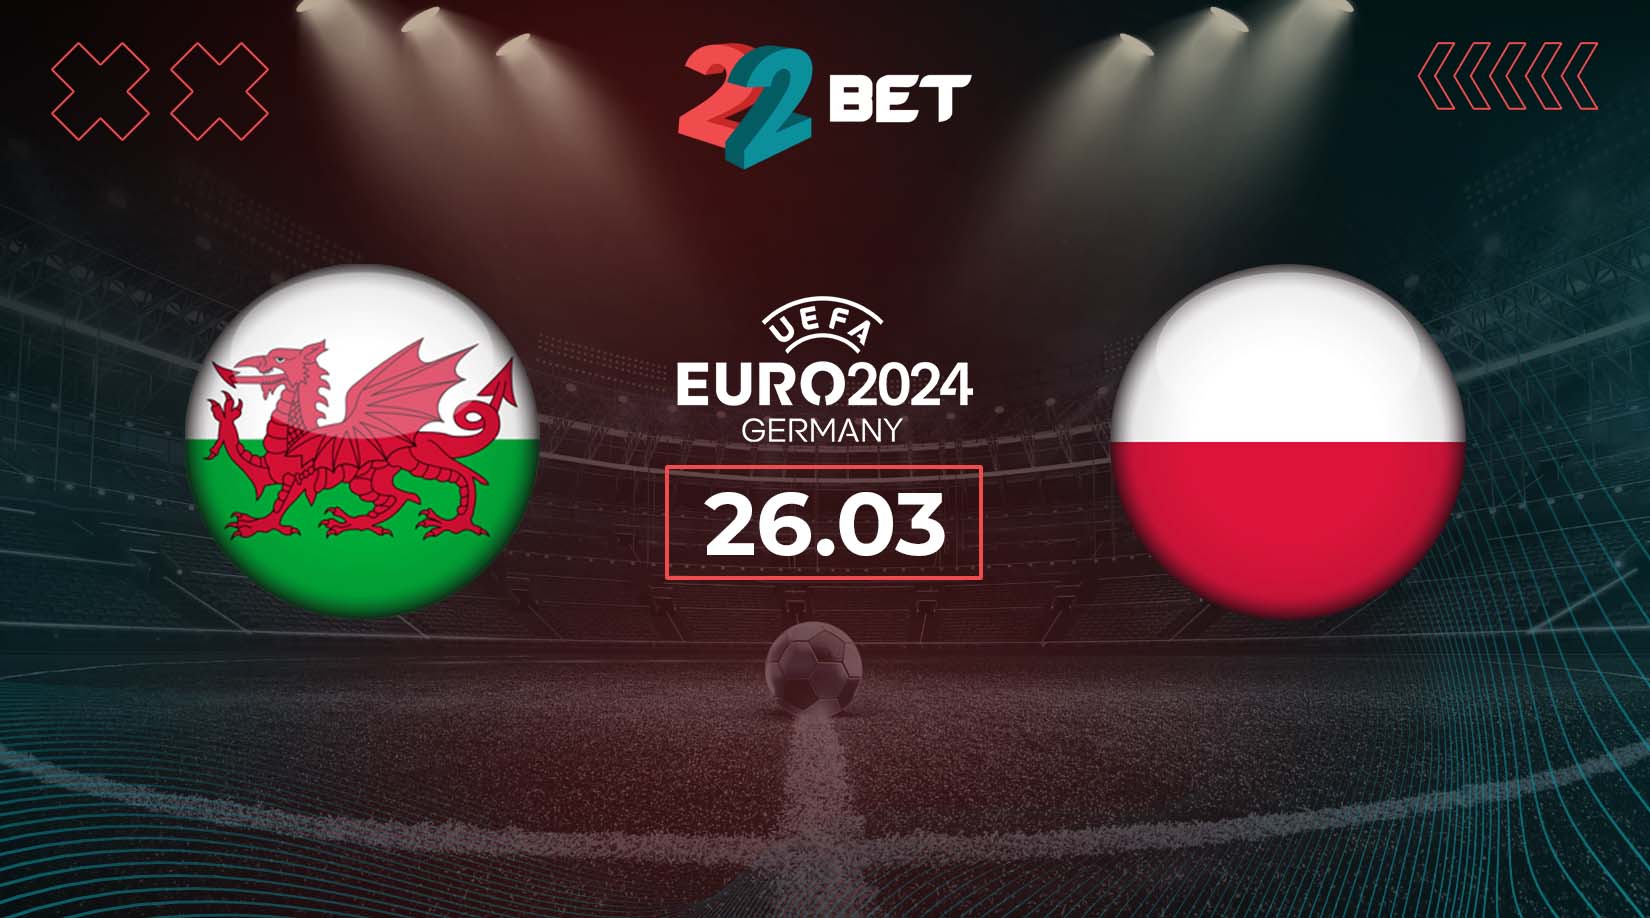 Wales vs Poland Prediction: Euro Play-Off Match on 26.03.2024